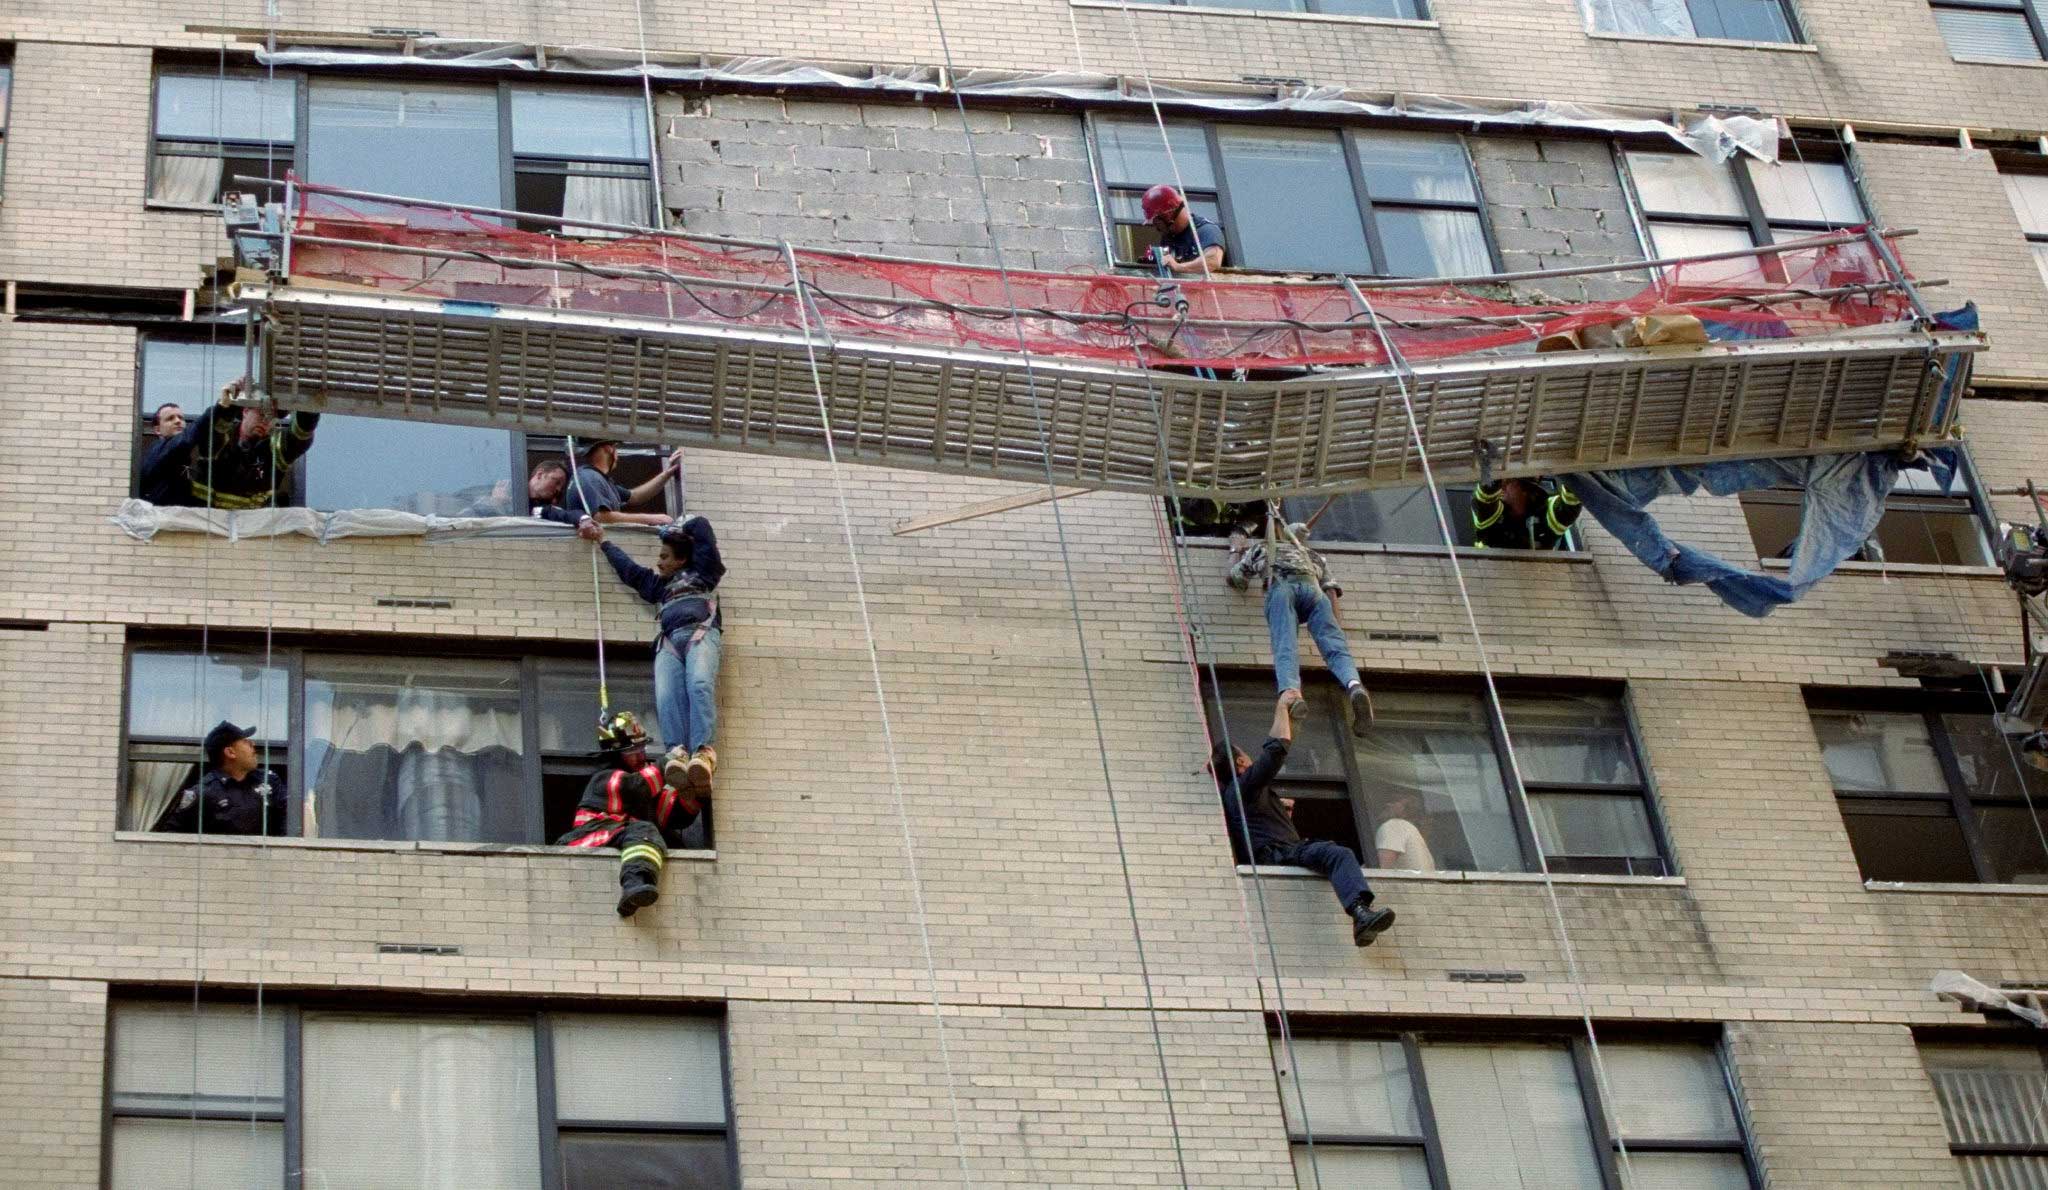 Firefighters rescue two construction workers dangling 8 floors off the ground from a building in Midtown Manhattan in New York city on Oct. 12, 1999.